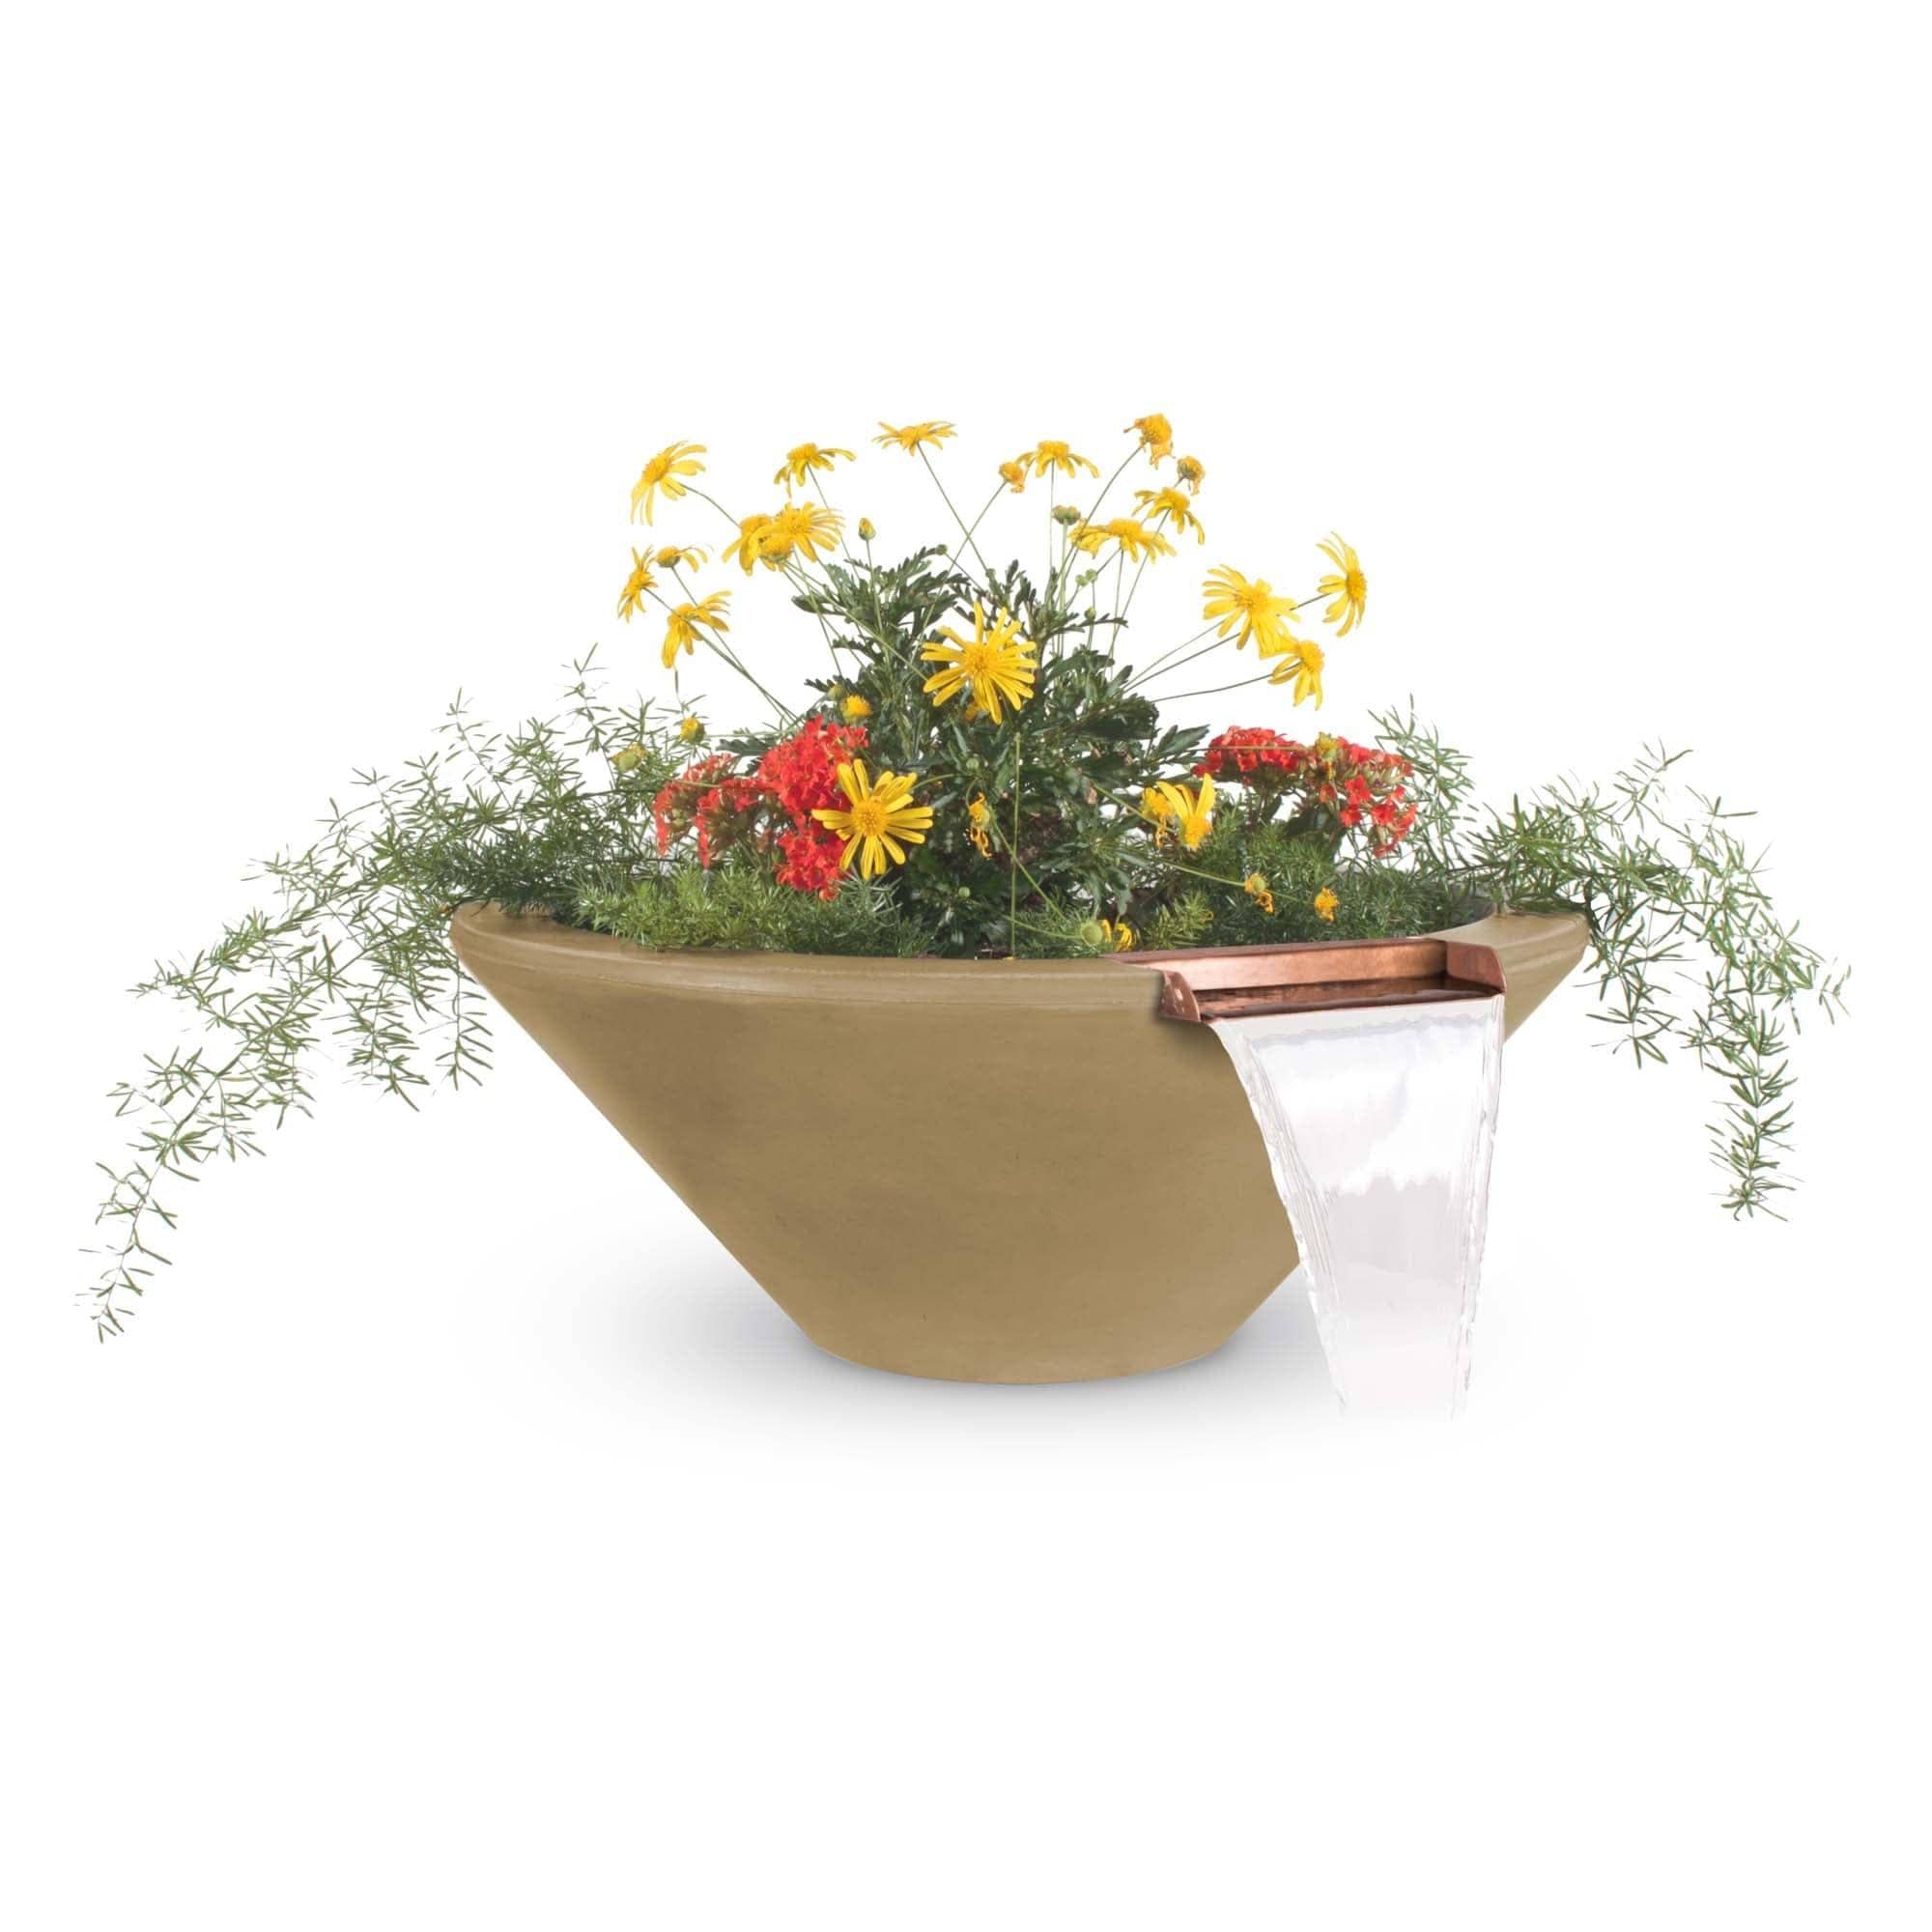 The Outdoor Plus Cazo Planter and Water Bowl - Concrete